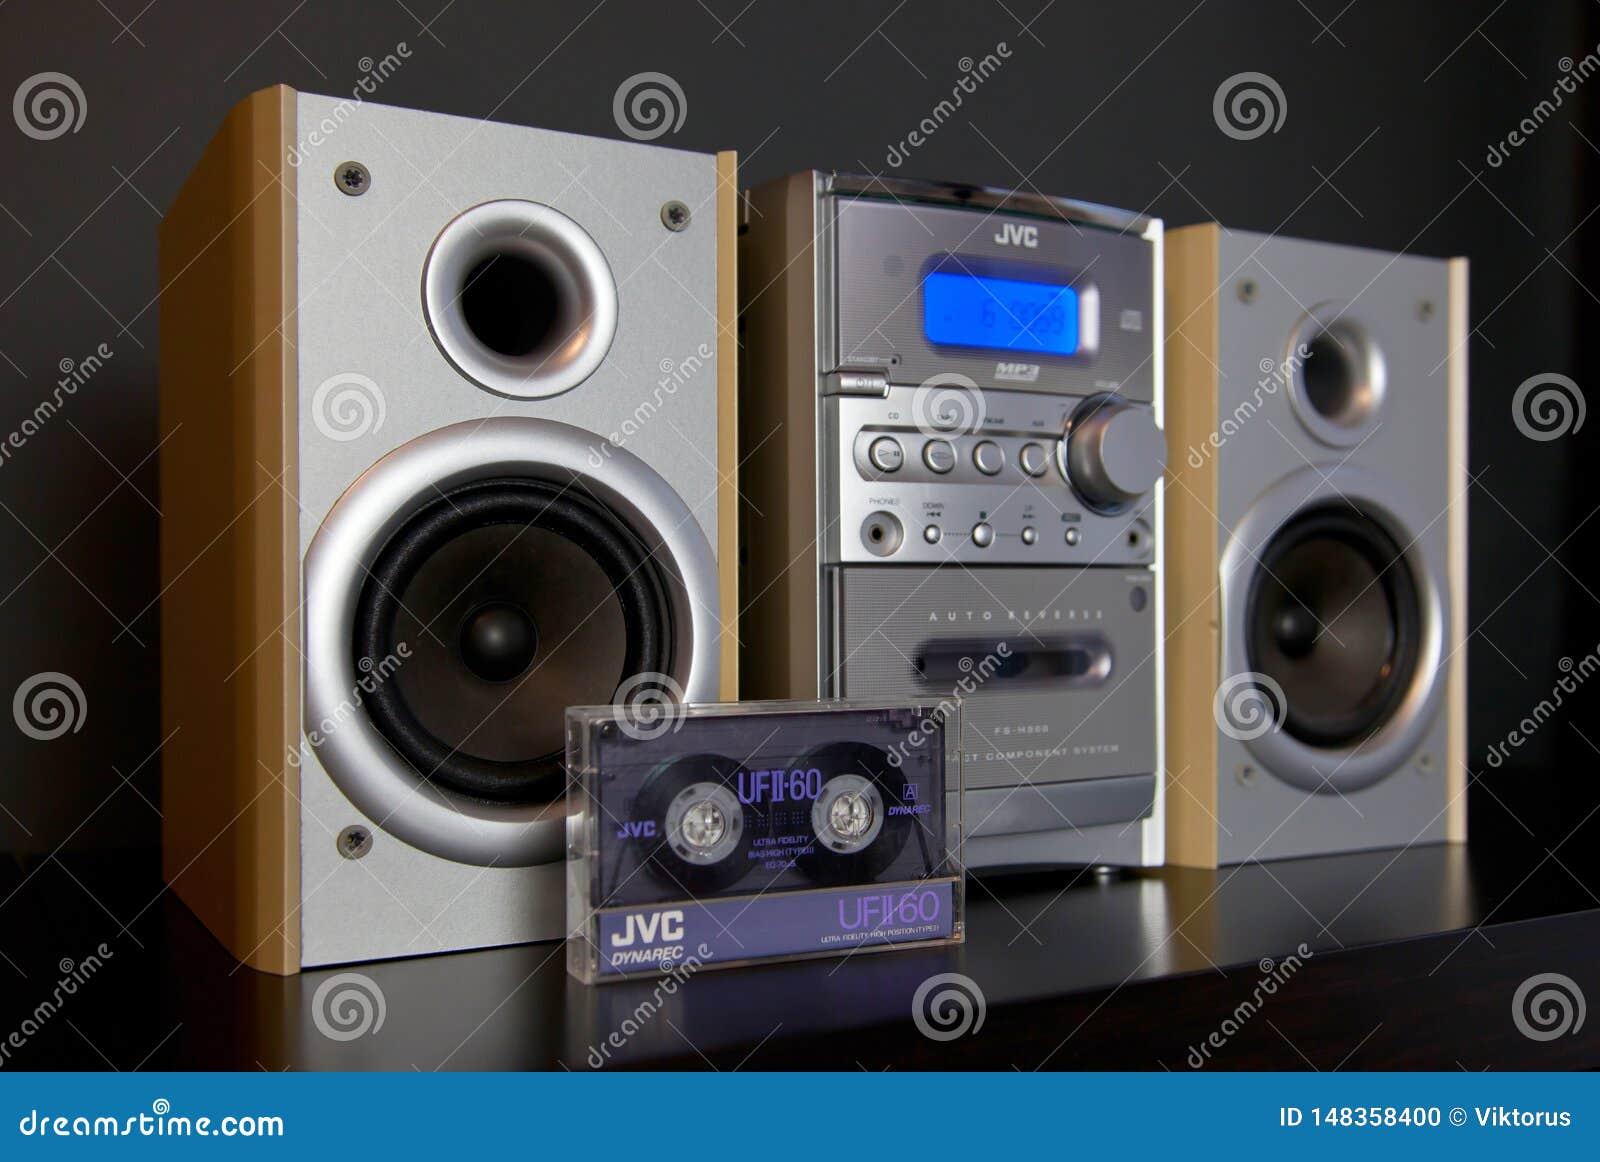 System Jvc Photos - Free & Royalty-Free Stock Photos from Dreamstime